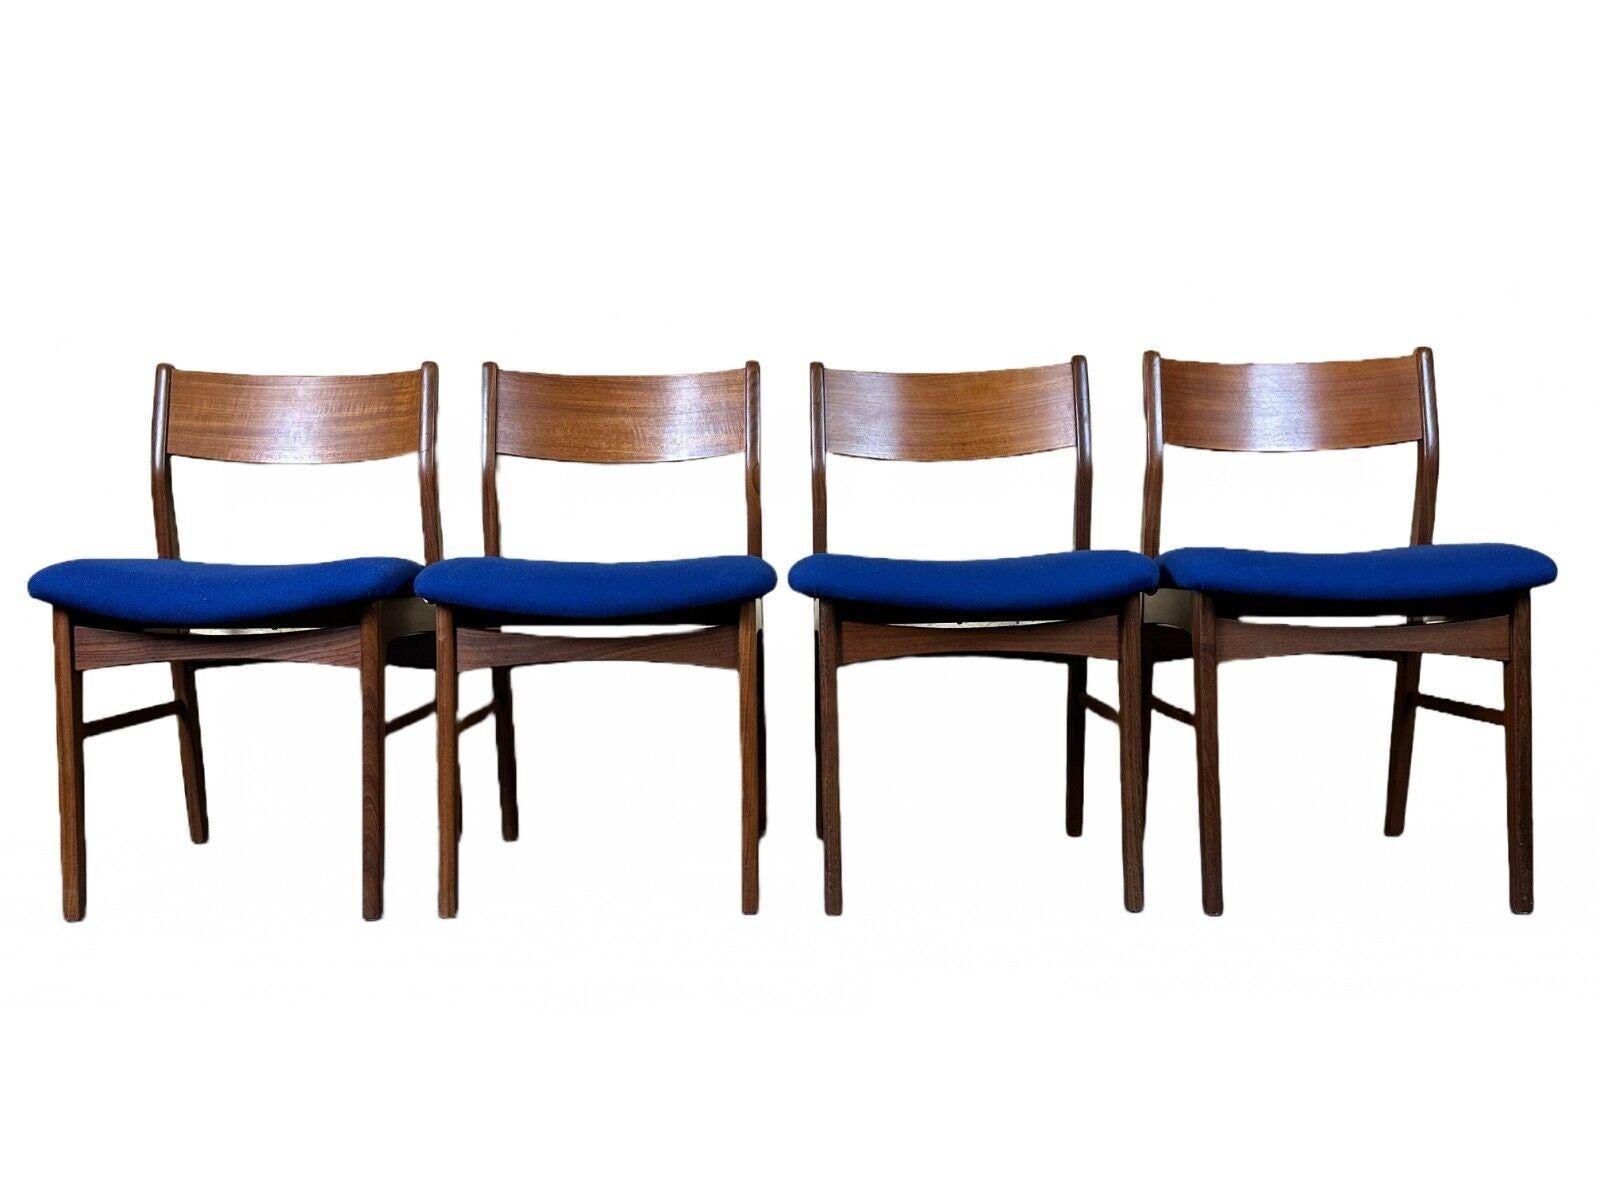 4x 60s 70s Teak Chair Dining Chair Danish Modern Design Denmark

Object: 4x chair

Manufacturer:

Condition: good

Age: around 1960-1970

Dimensions:

Width = 50cm
Depth = 46cm
Height = 79cm
Seat height = 46cm

Material: teak, fabric

Other